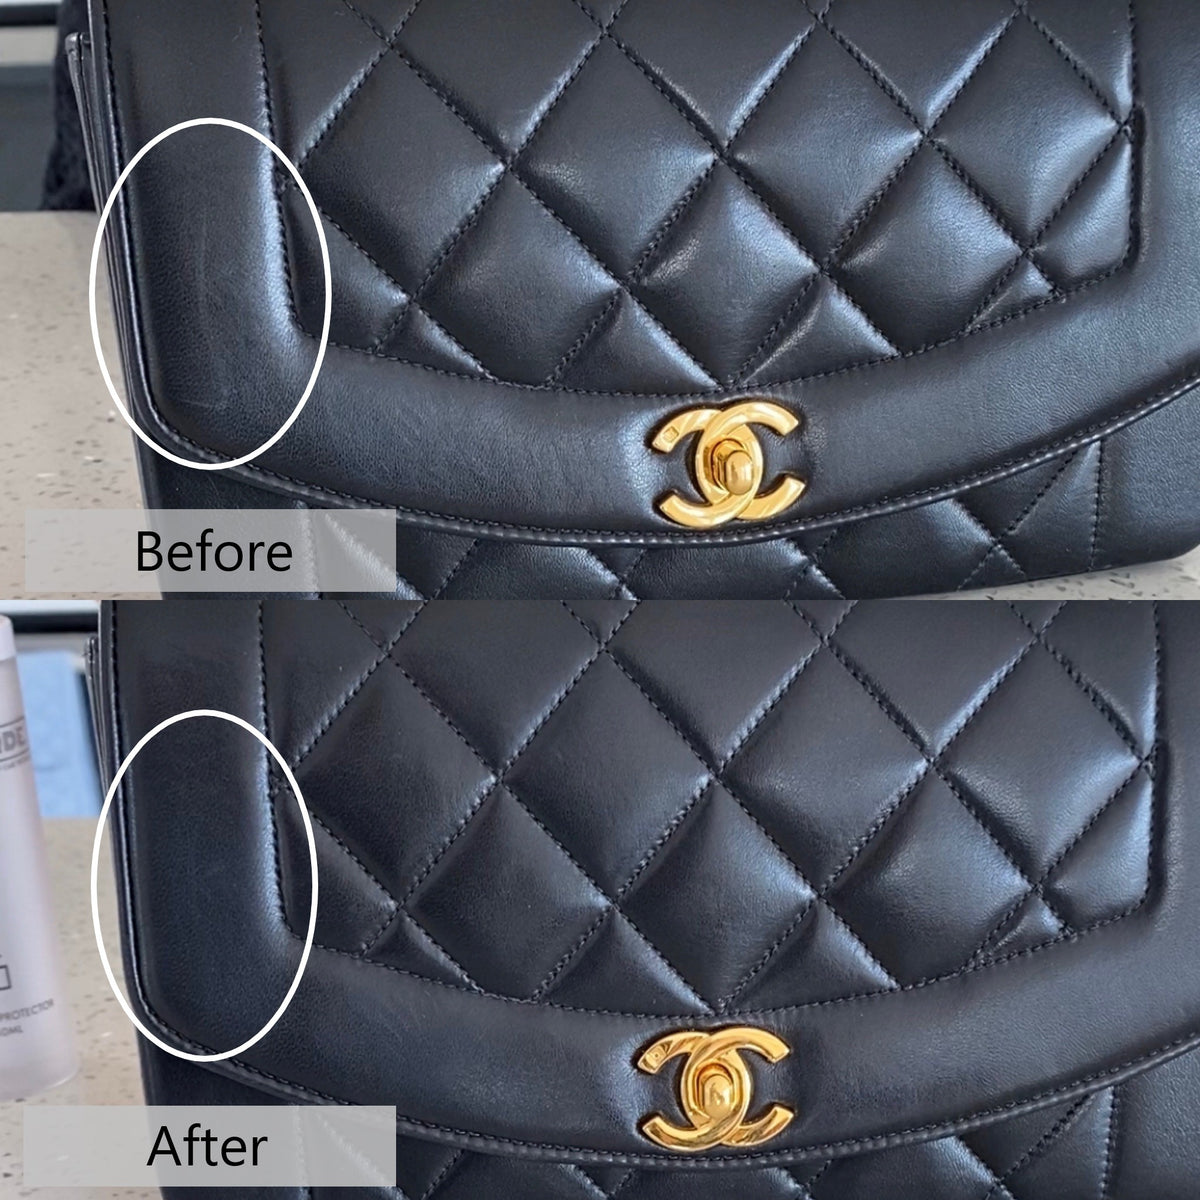 Chanel's New Bag-Repair Policy, Explained